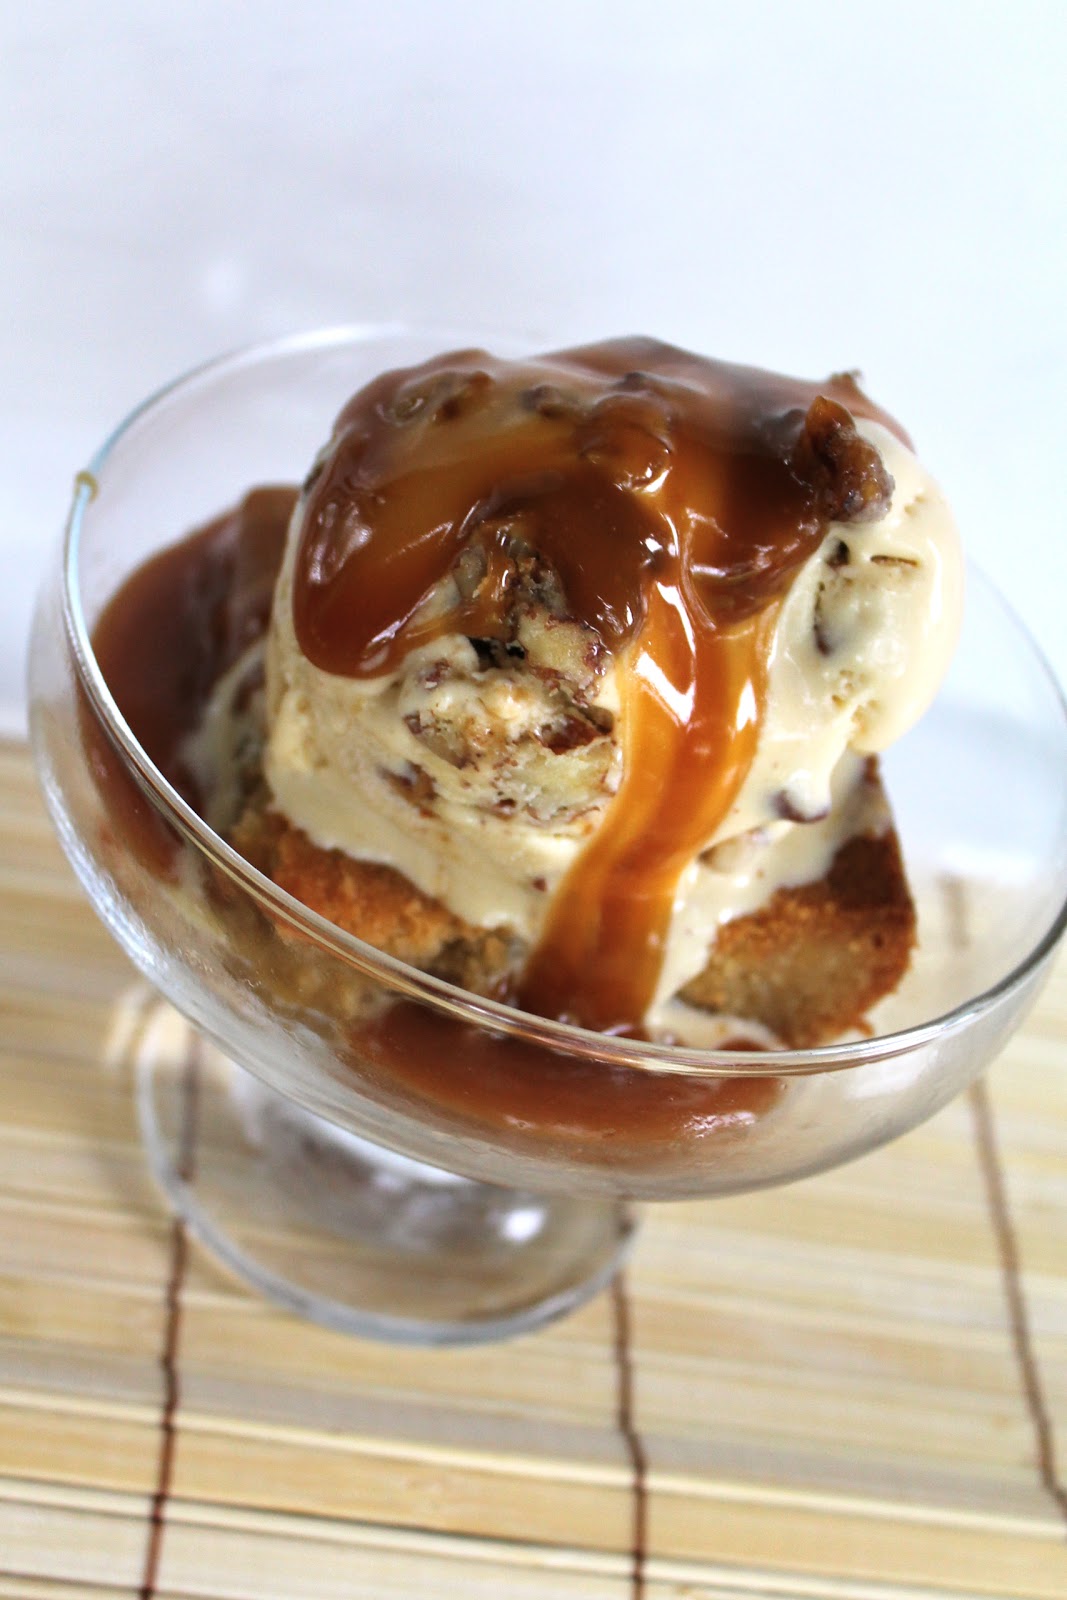 Yammie's Noshery: Butter Pecan Ice Cream with Caramel Sauce